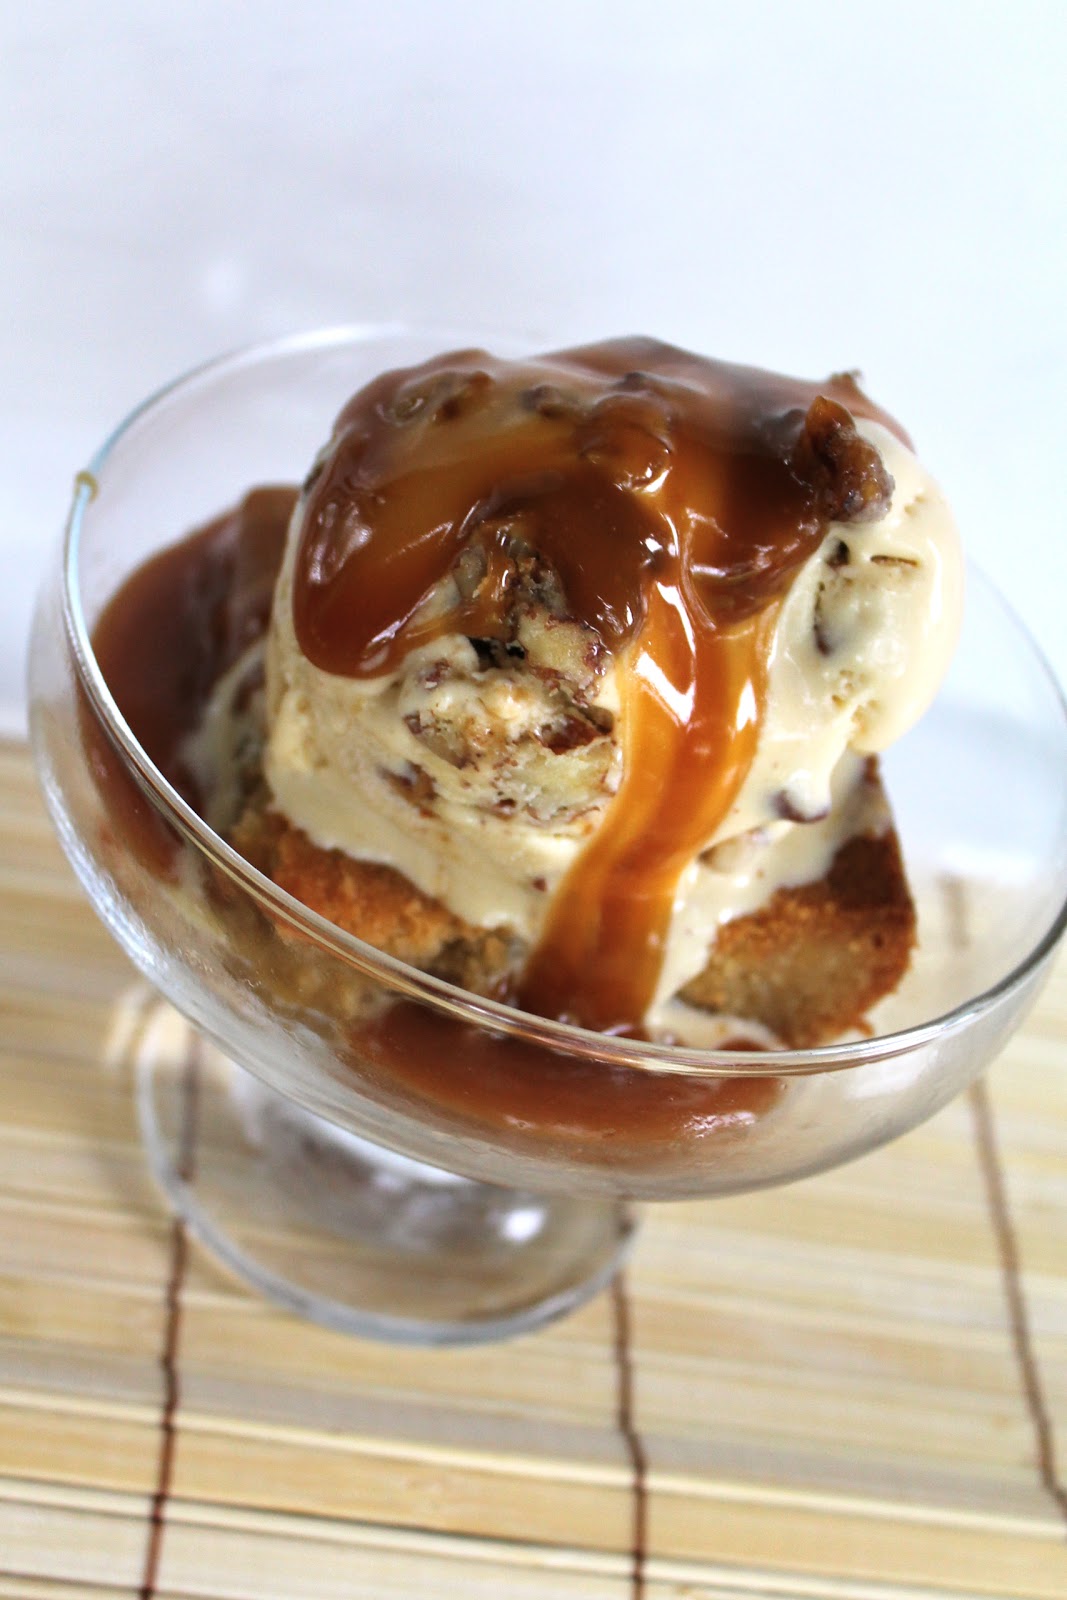 Yammie's Noshery: Butter Pecan Ice Cream with Caramel Sauce